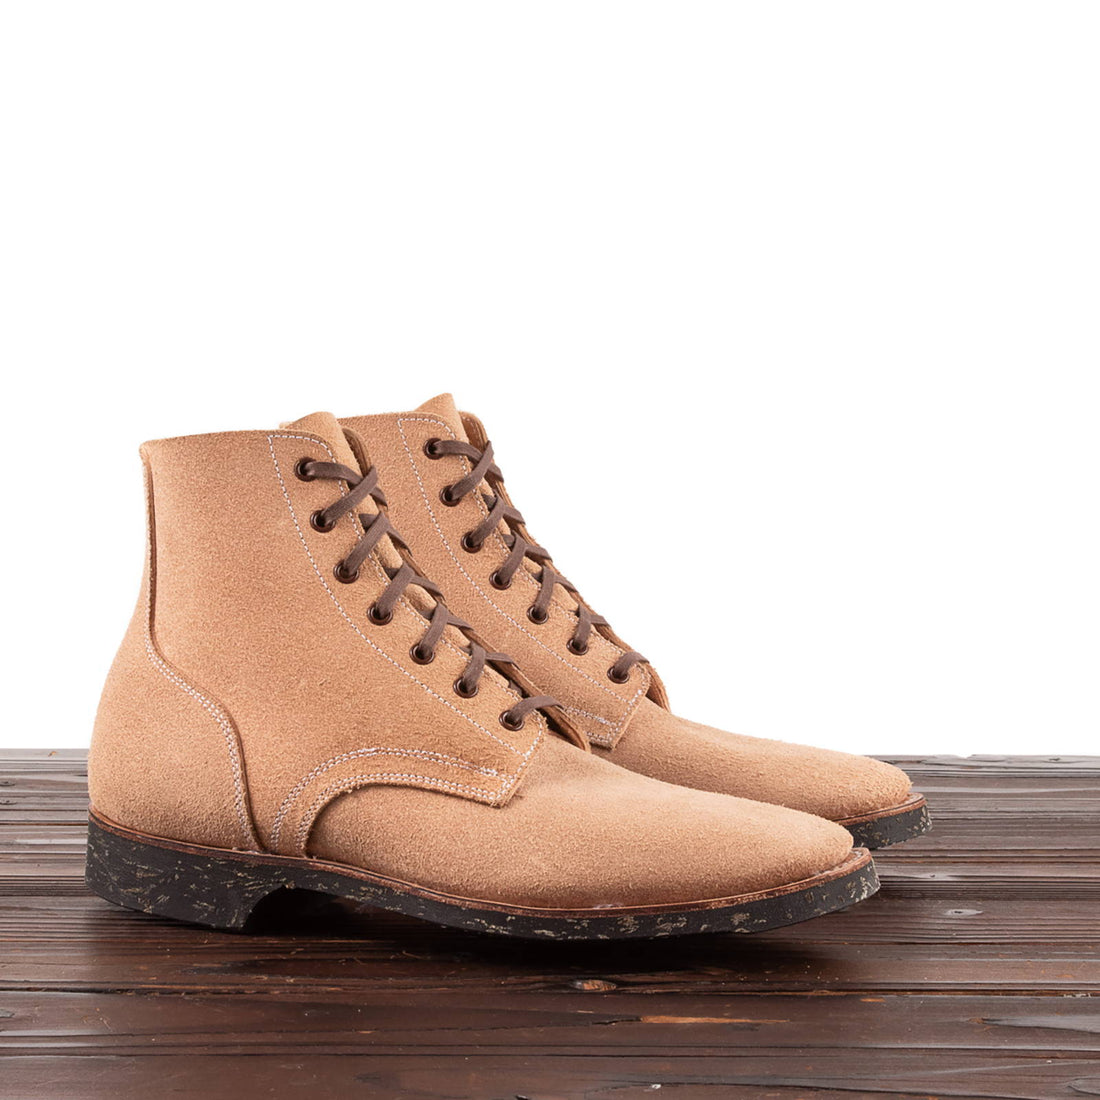 Deep Dive - Clinch Yeager Boots in Natural Roughout Deep Dive